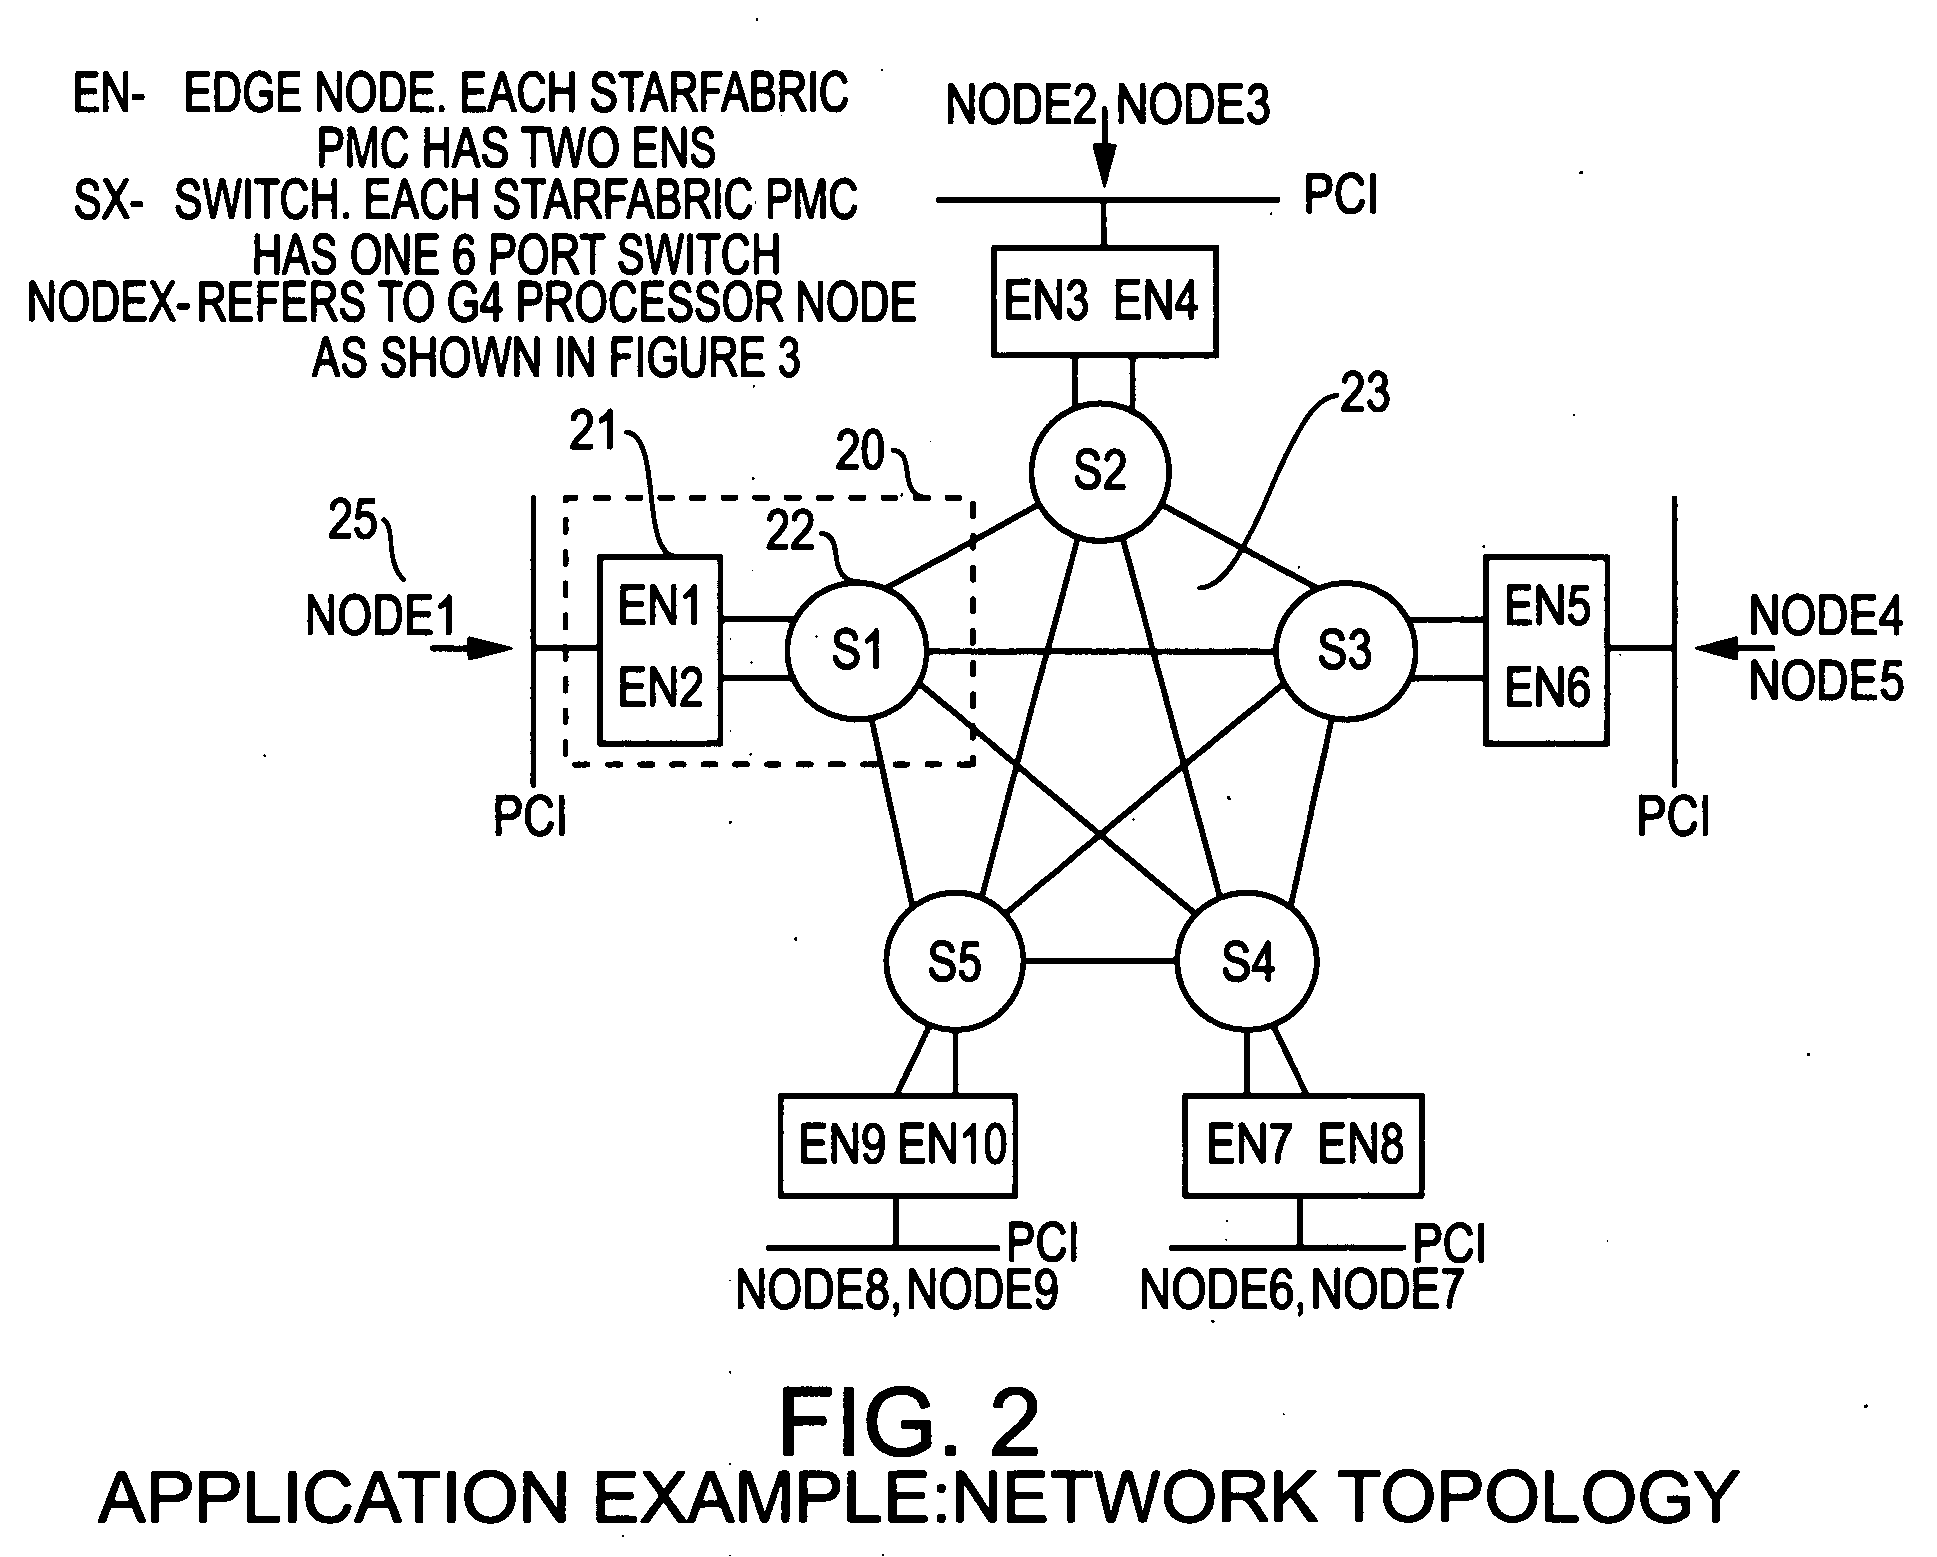 Apparatus for enabling distributed processing across a plurality of circuit cards